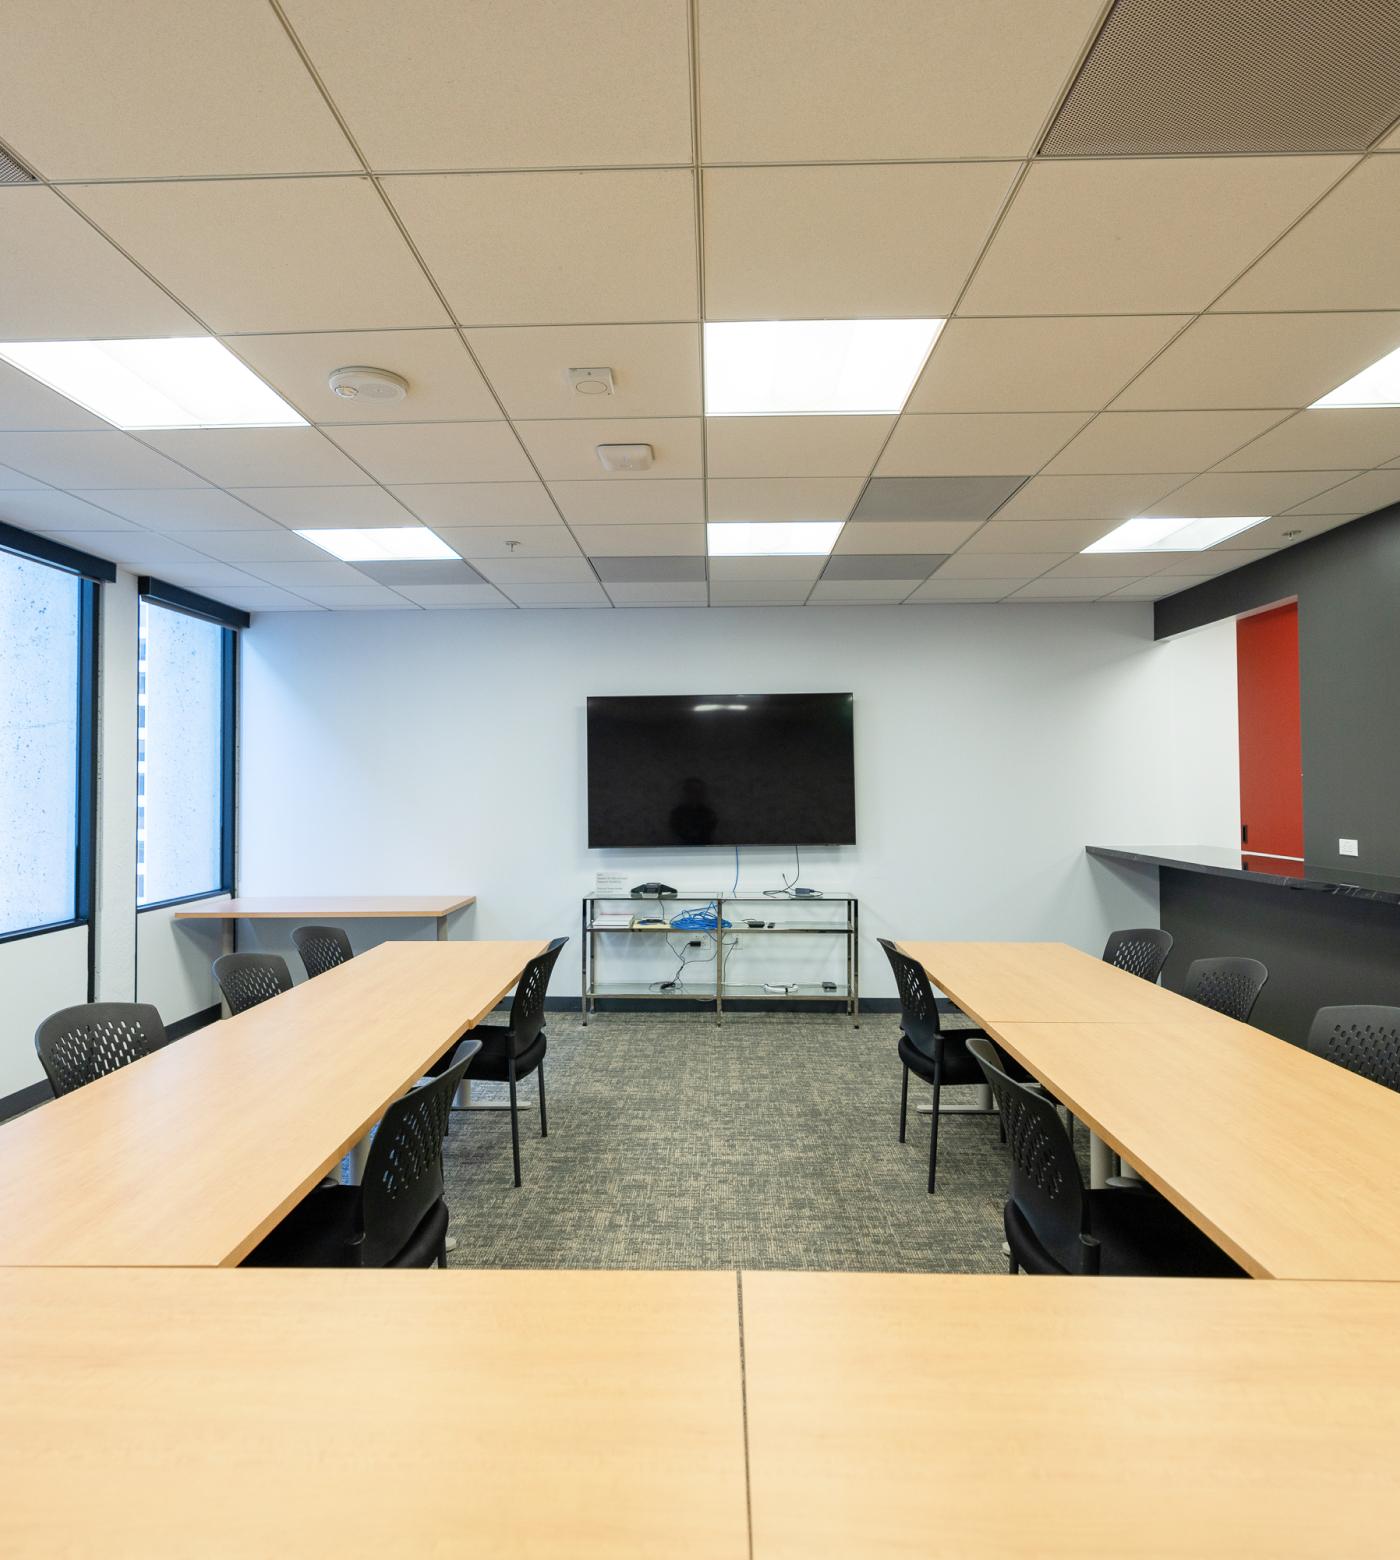 Conference room at 50 California St.